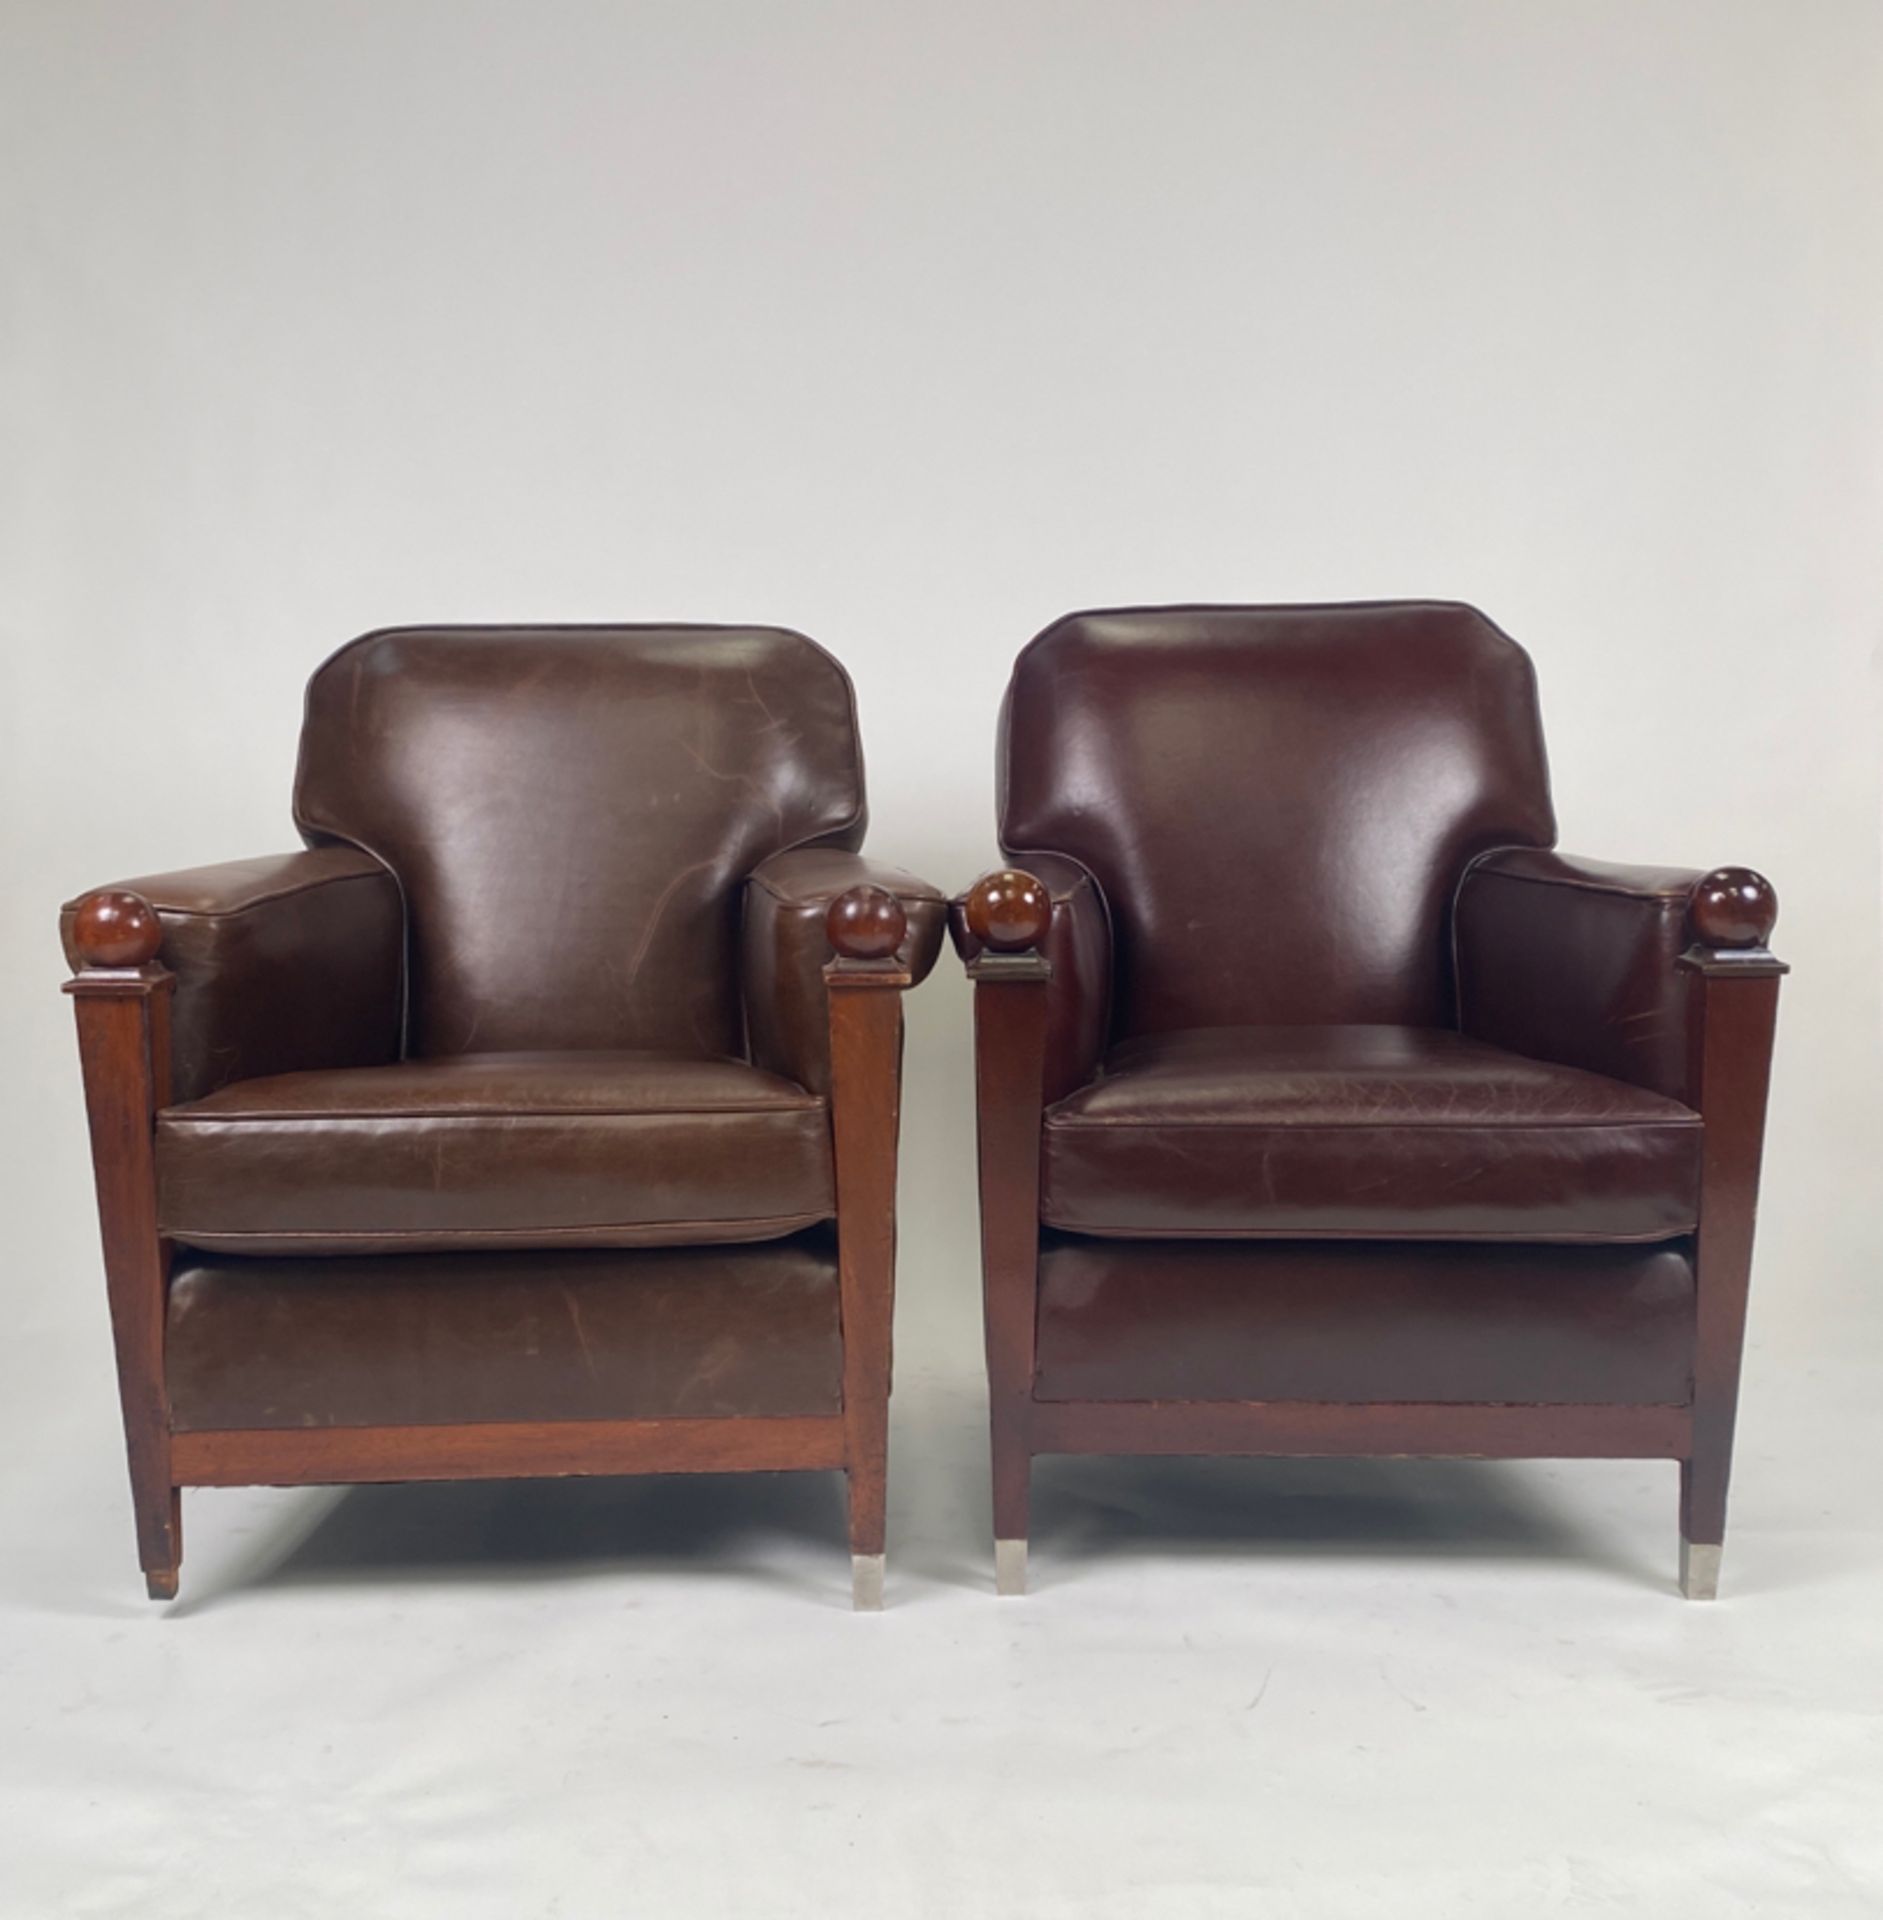 Pair of Leather Club Chairs - Image 2 of 7